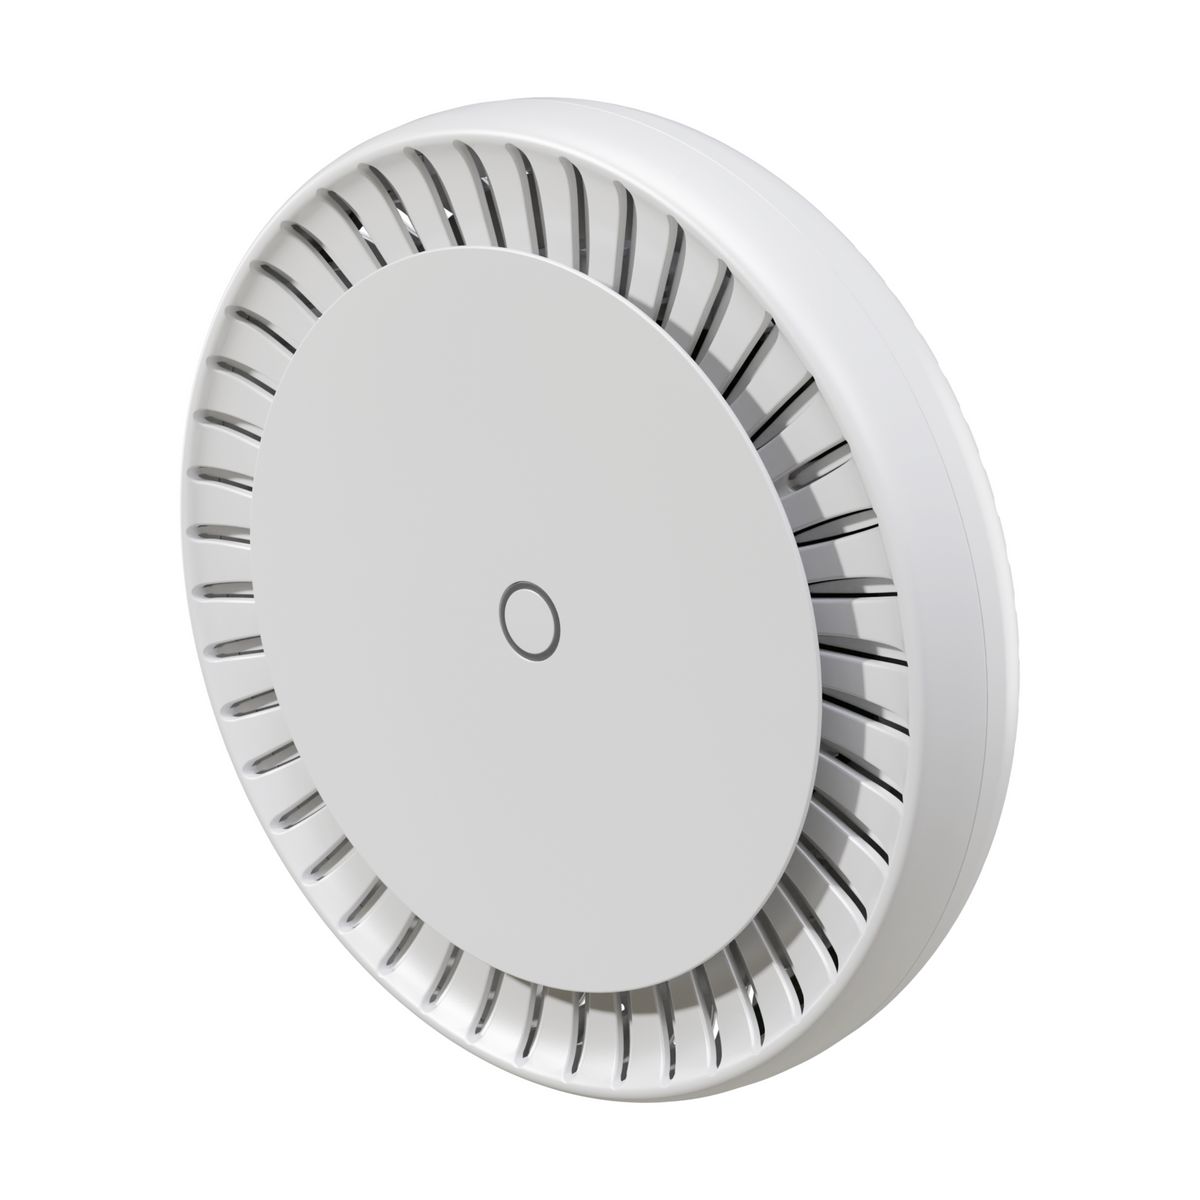 Wireless Access Point Mikrotik CAPGI-5HAXD2HAXD, Procesor: IPQ-6010 1.8 GHz, 128 Mb NAND, 2 x GB ports, Tensiune alimentare: 18 - 57V DC, PoE In: 802.3af/at, Dimesiuni: 228 x 48mm, Consum max: 28W, Licenta RouterOS: L4, PoE Out: 802.3af/at, Standard Wi-Fi: 2.4 GHz 802.11ax dual-chain, 5 GHz 802.11_1